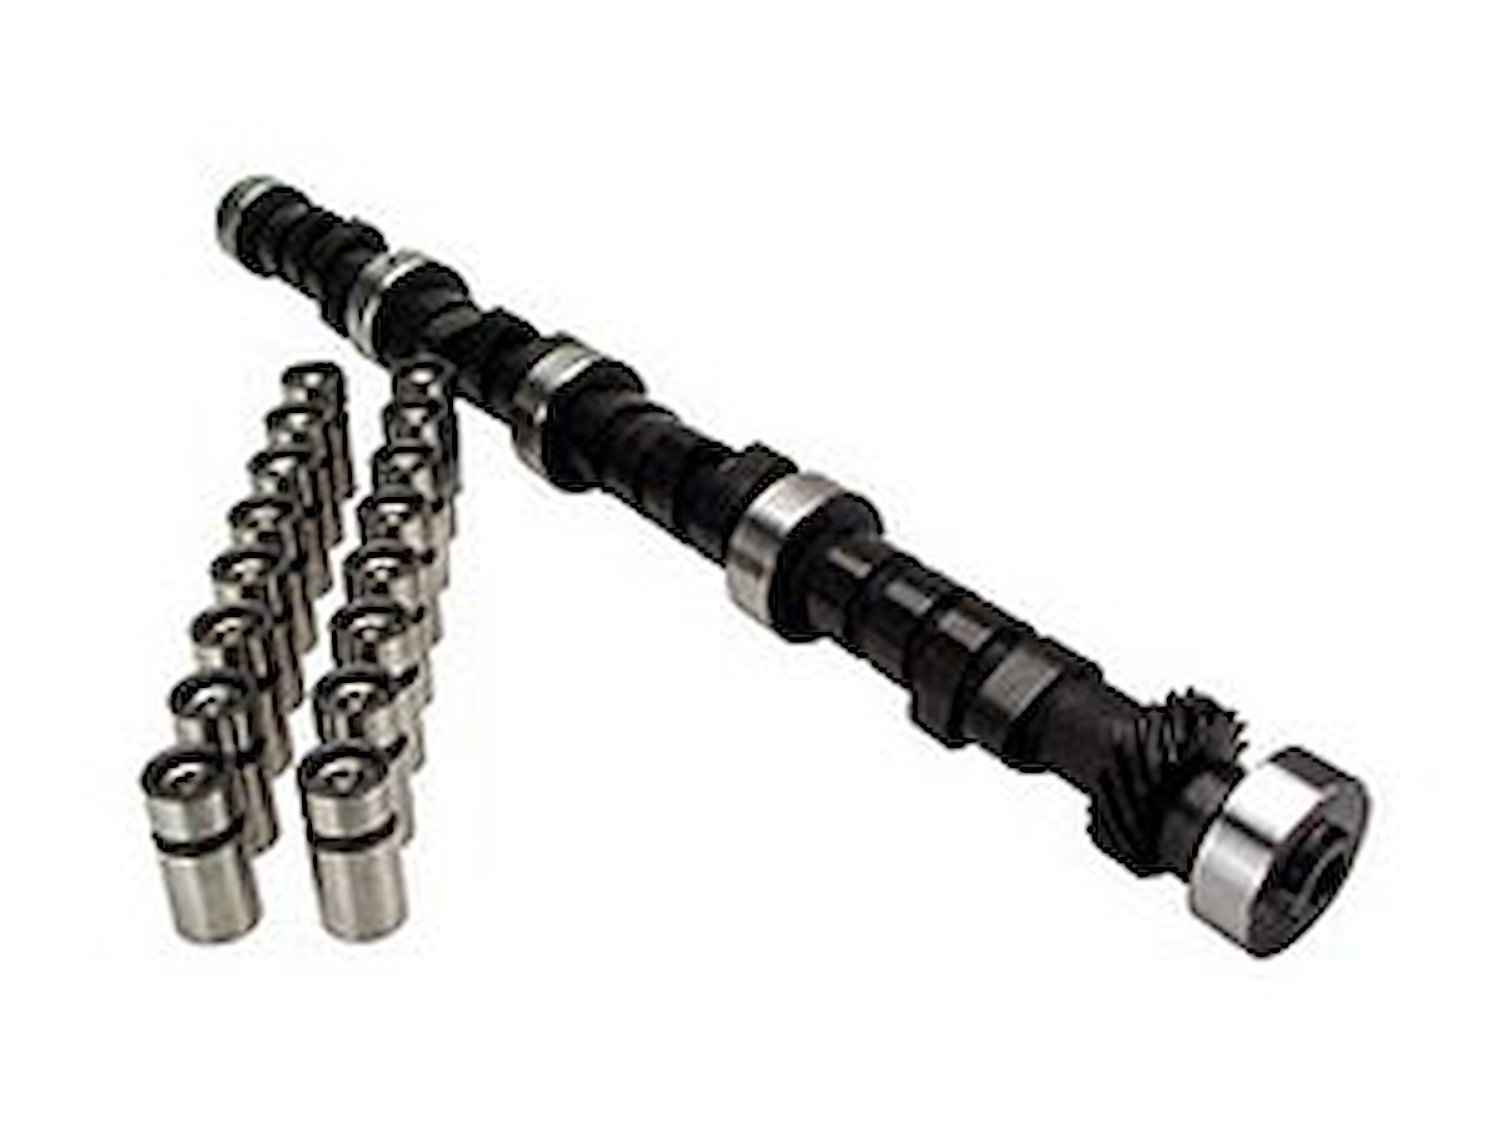 Xtreme Energy 294H Hydraulic Flat Tappet Camshaft & Lifter Kit Lift .519"/.524" Duration 294°/306° RPM Range 2800-6800